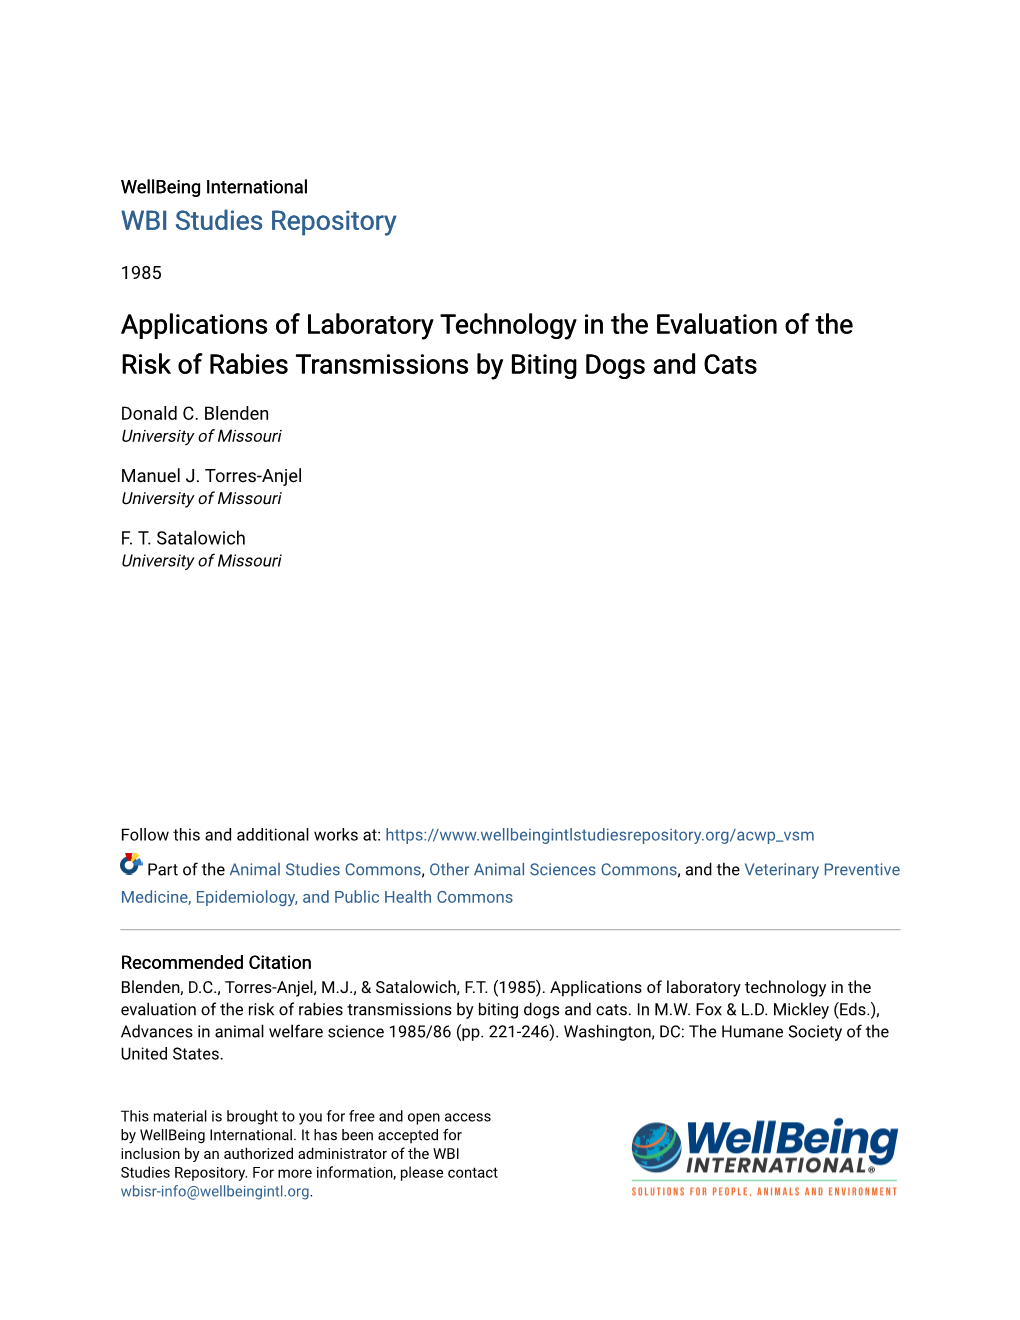 Applications of Laboratory Technology in the Evaluation of the Risk of Rabies Transmissions by Biting Dogs and Cats